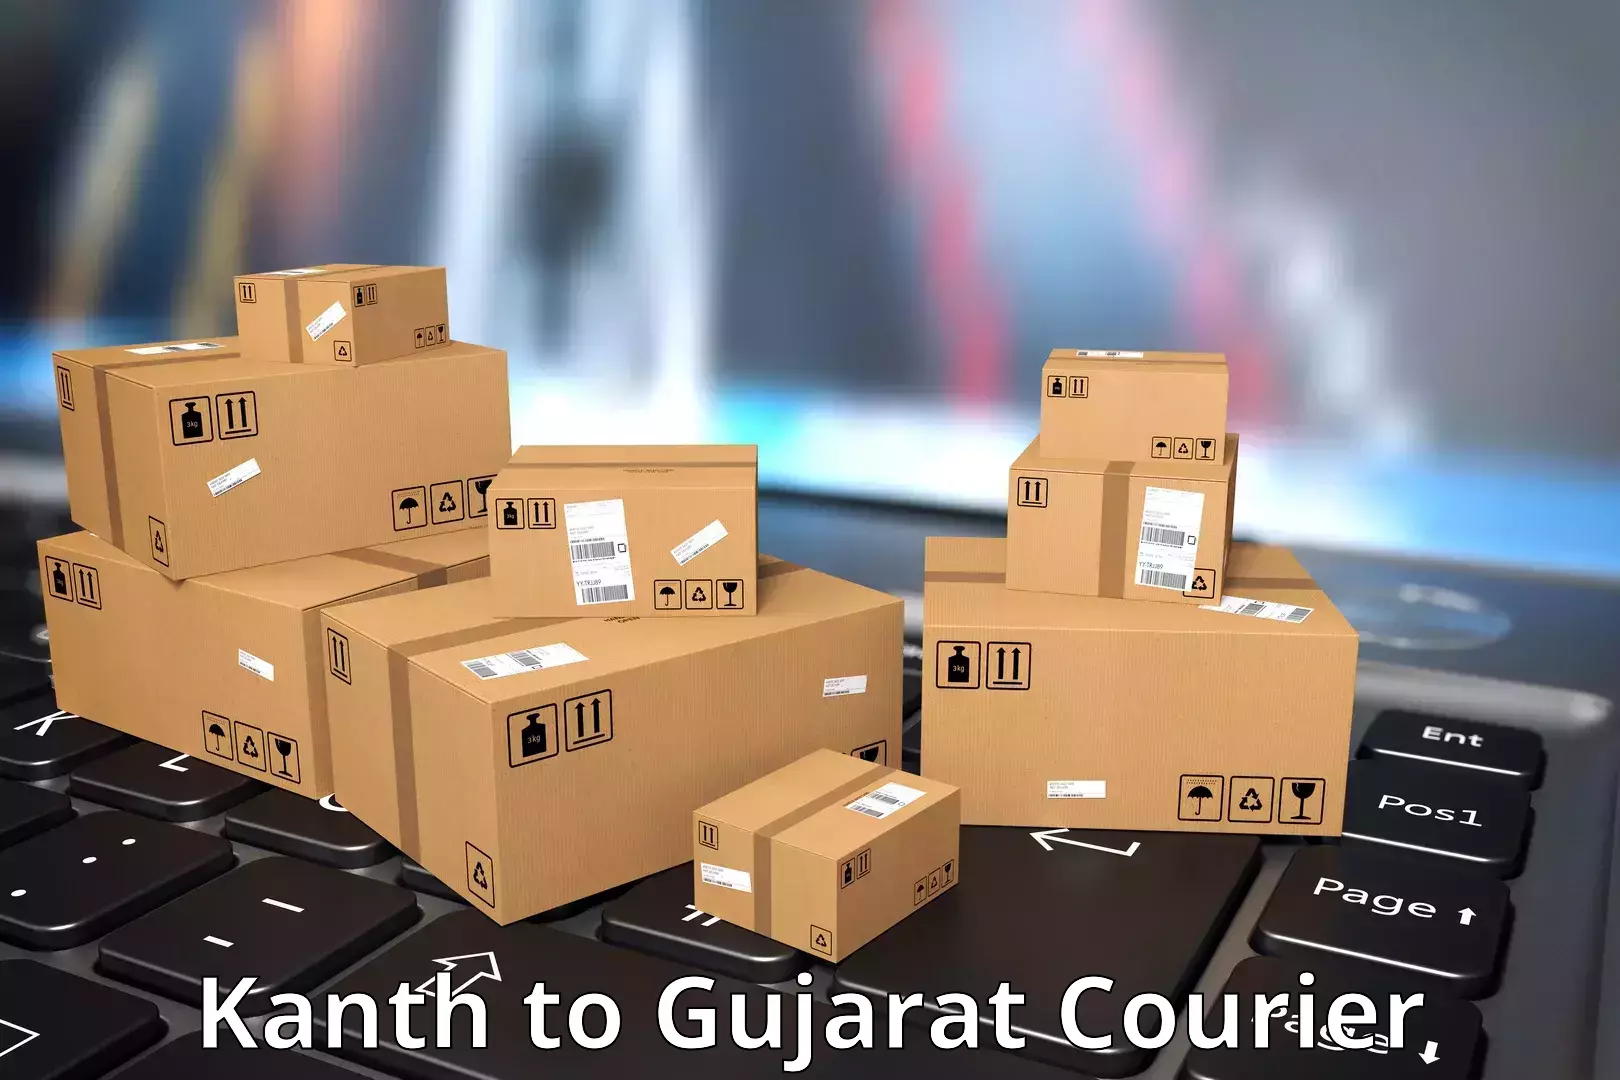 Innovative shipping solutions Kanth to Anand Agricultural University